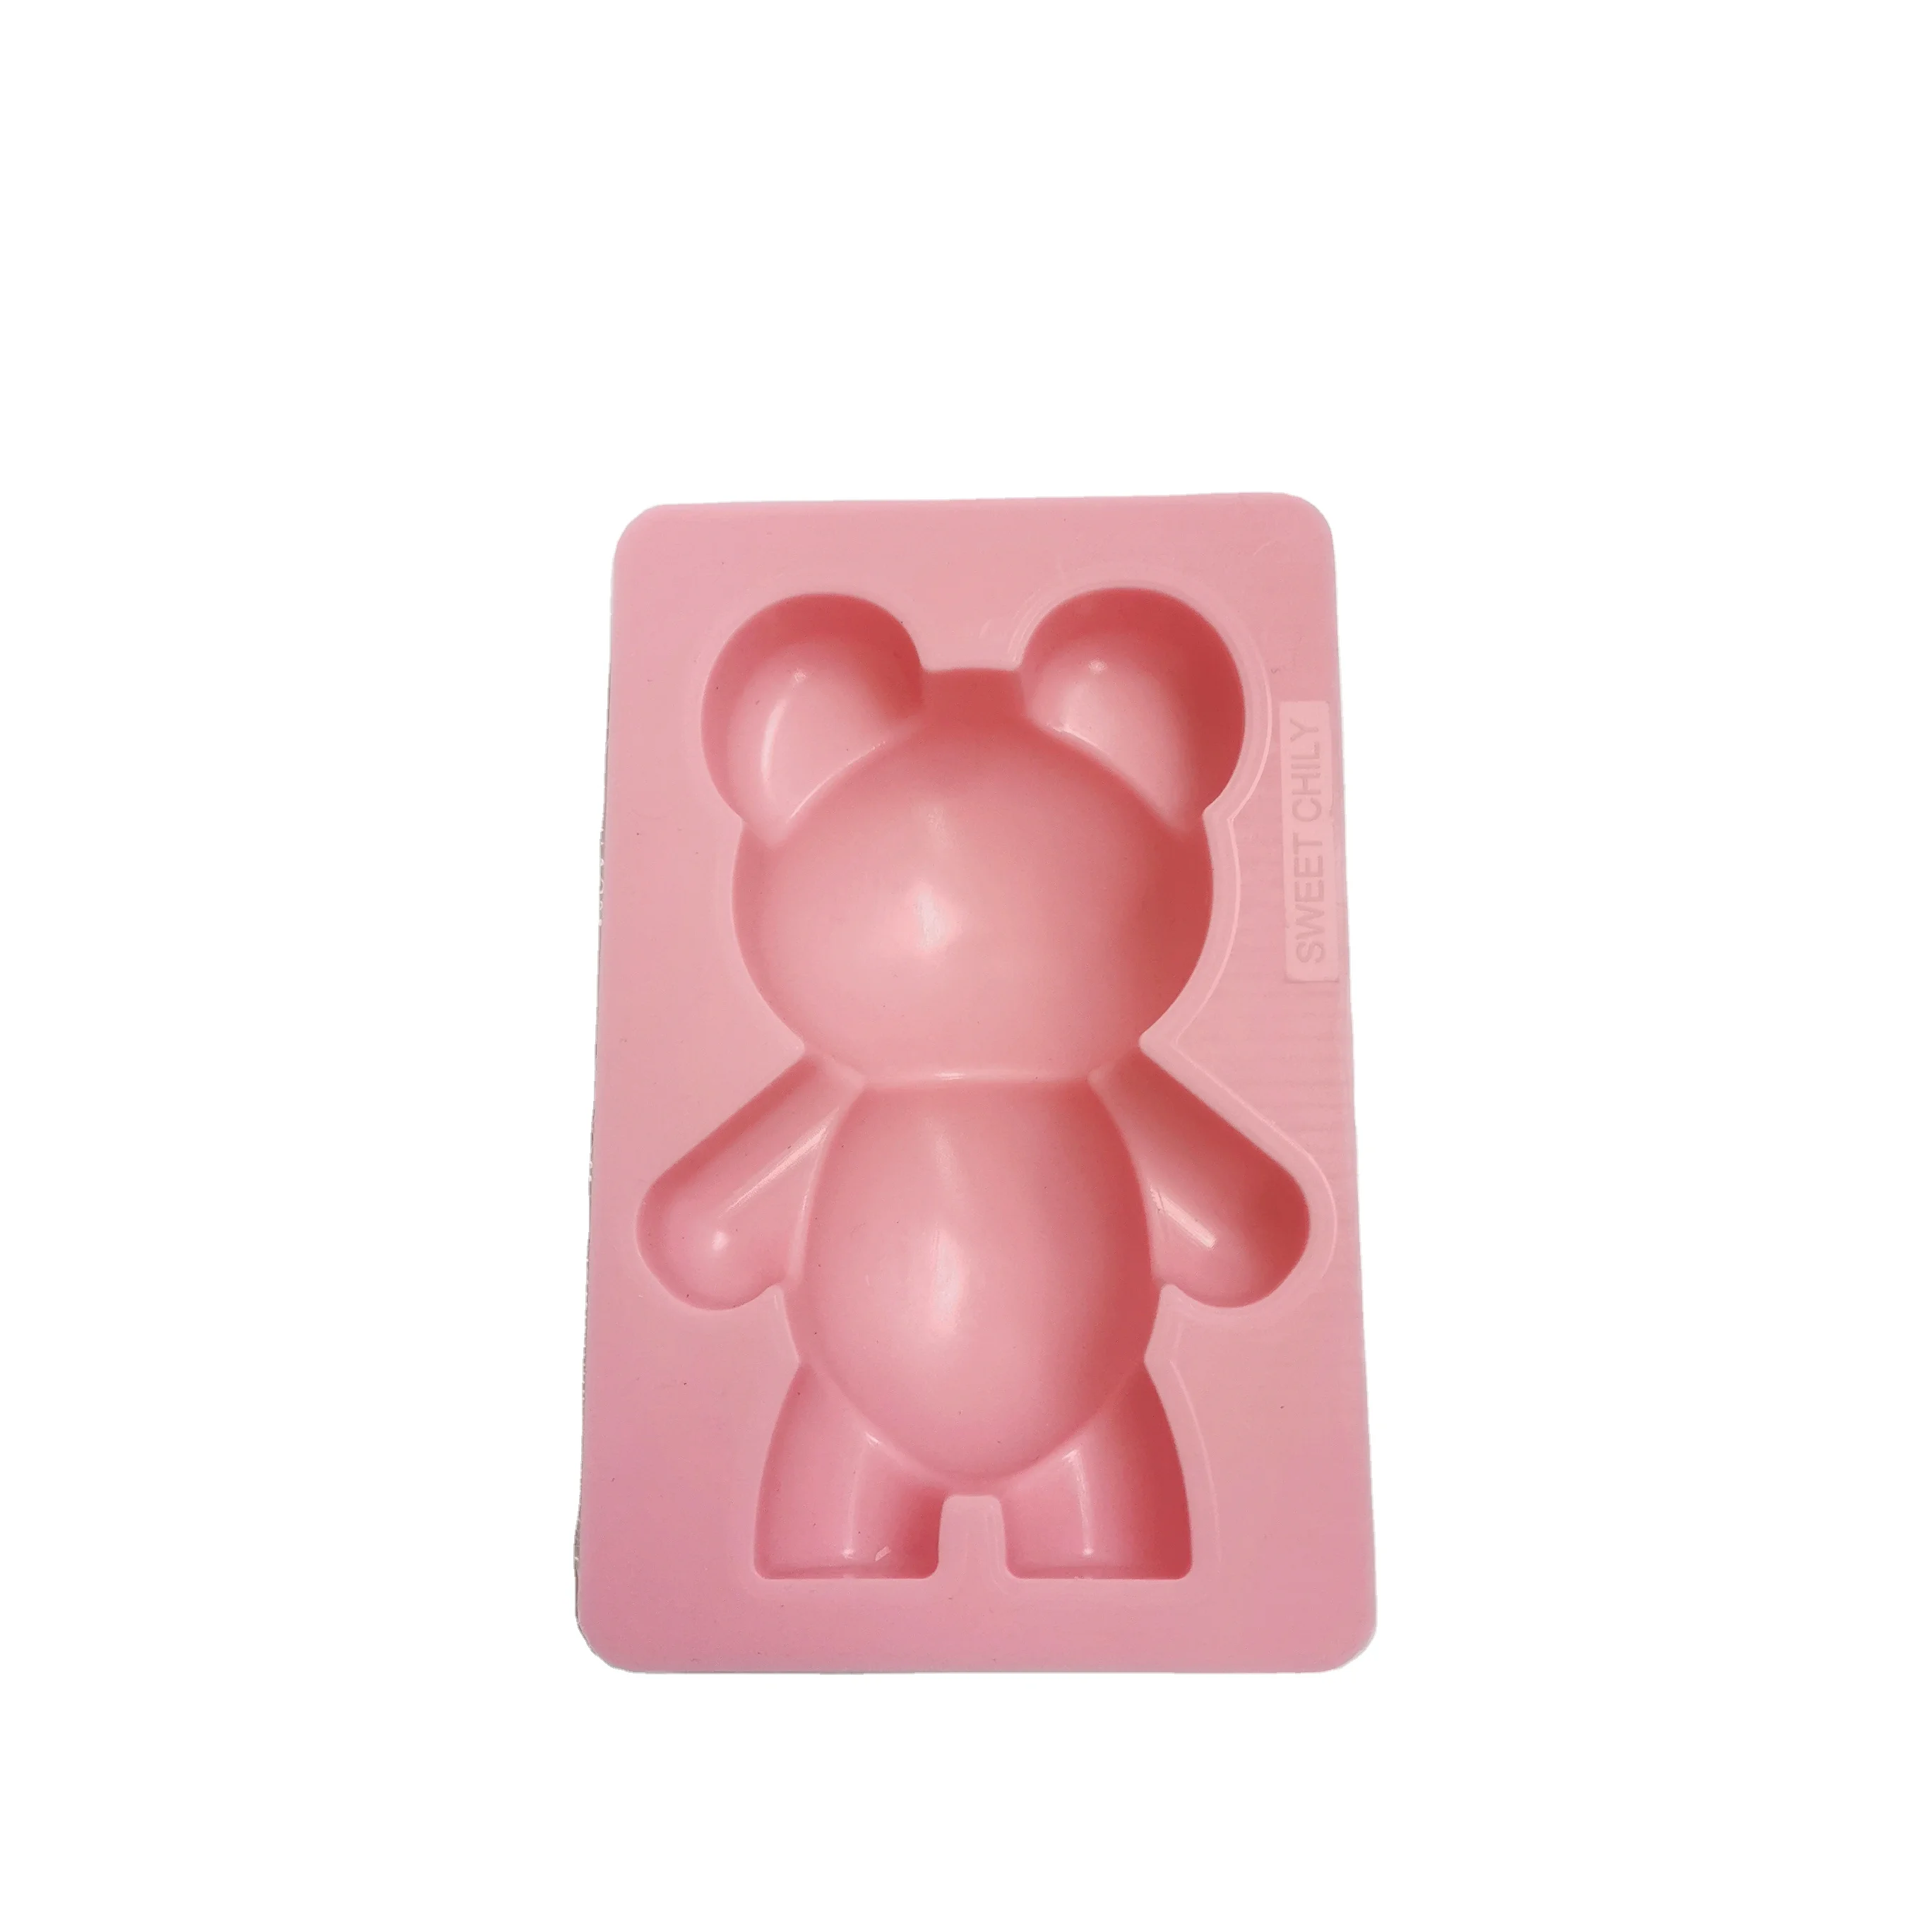 

gummy bear ice silicon mold silicone candle cake molds 3d large teddy bear silicone chocolate mold, Pink